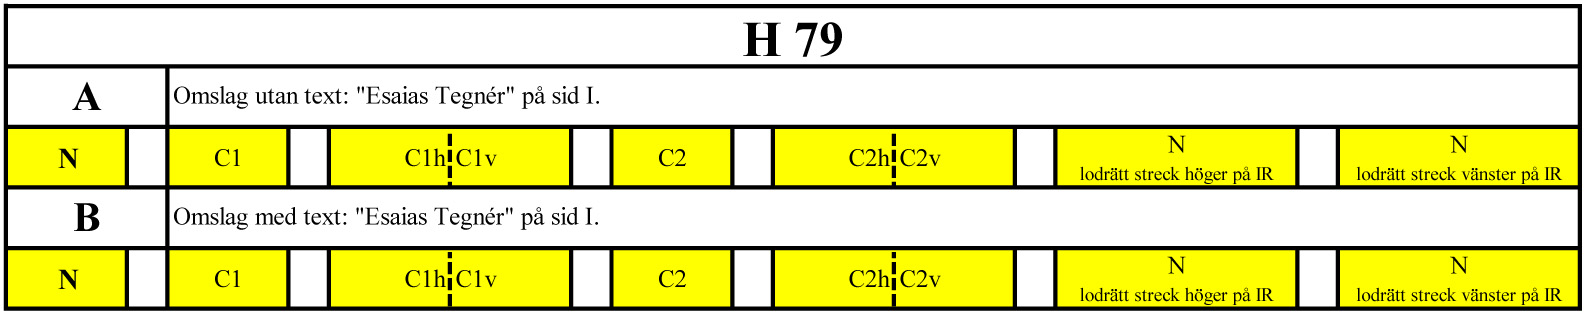 H79Tabell